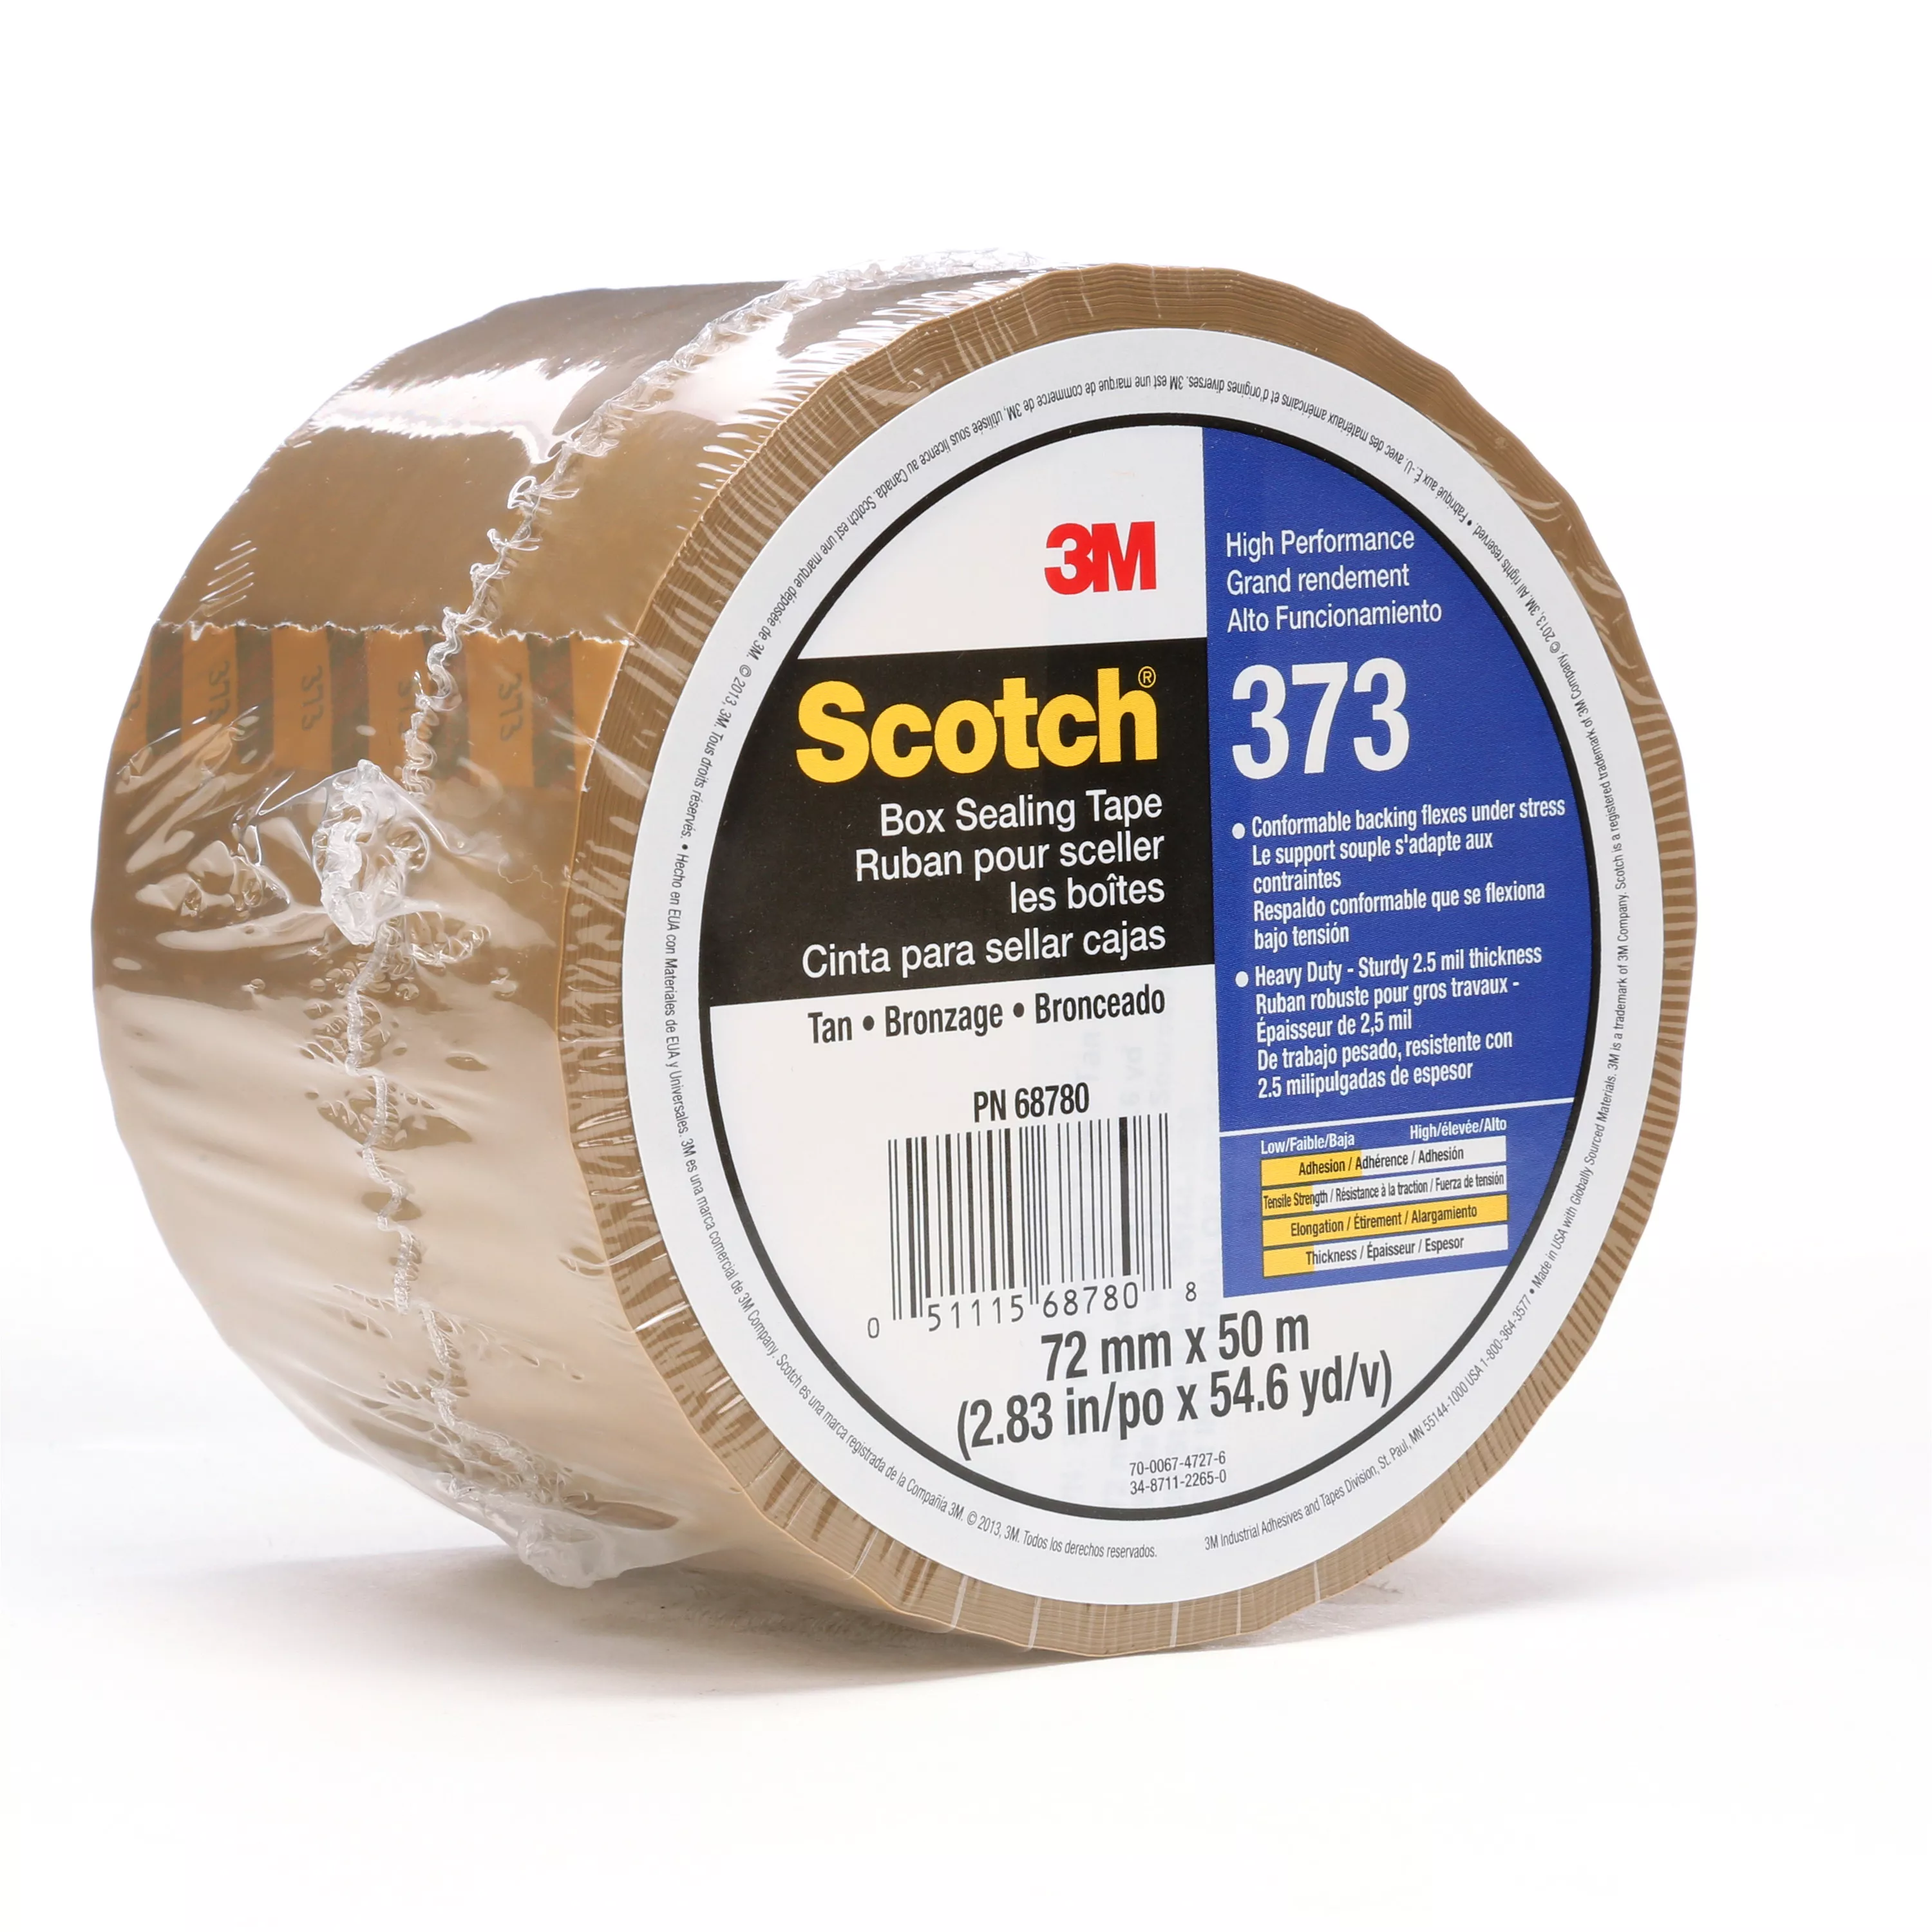 Scotch® Box Sealing Tape 373, Tan, 72 mm x 50 m, 24/Case, Individually
Wrapped Conveniently Packaged